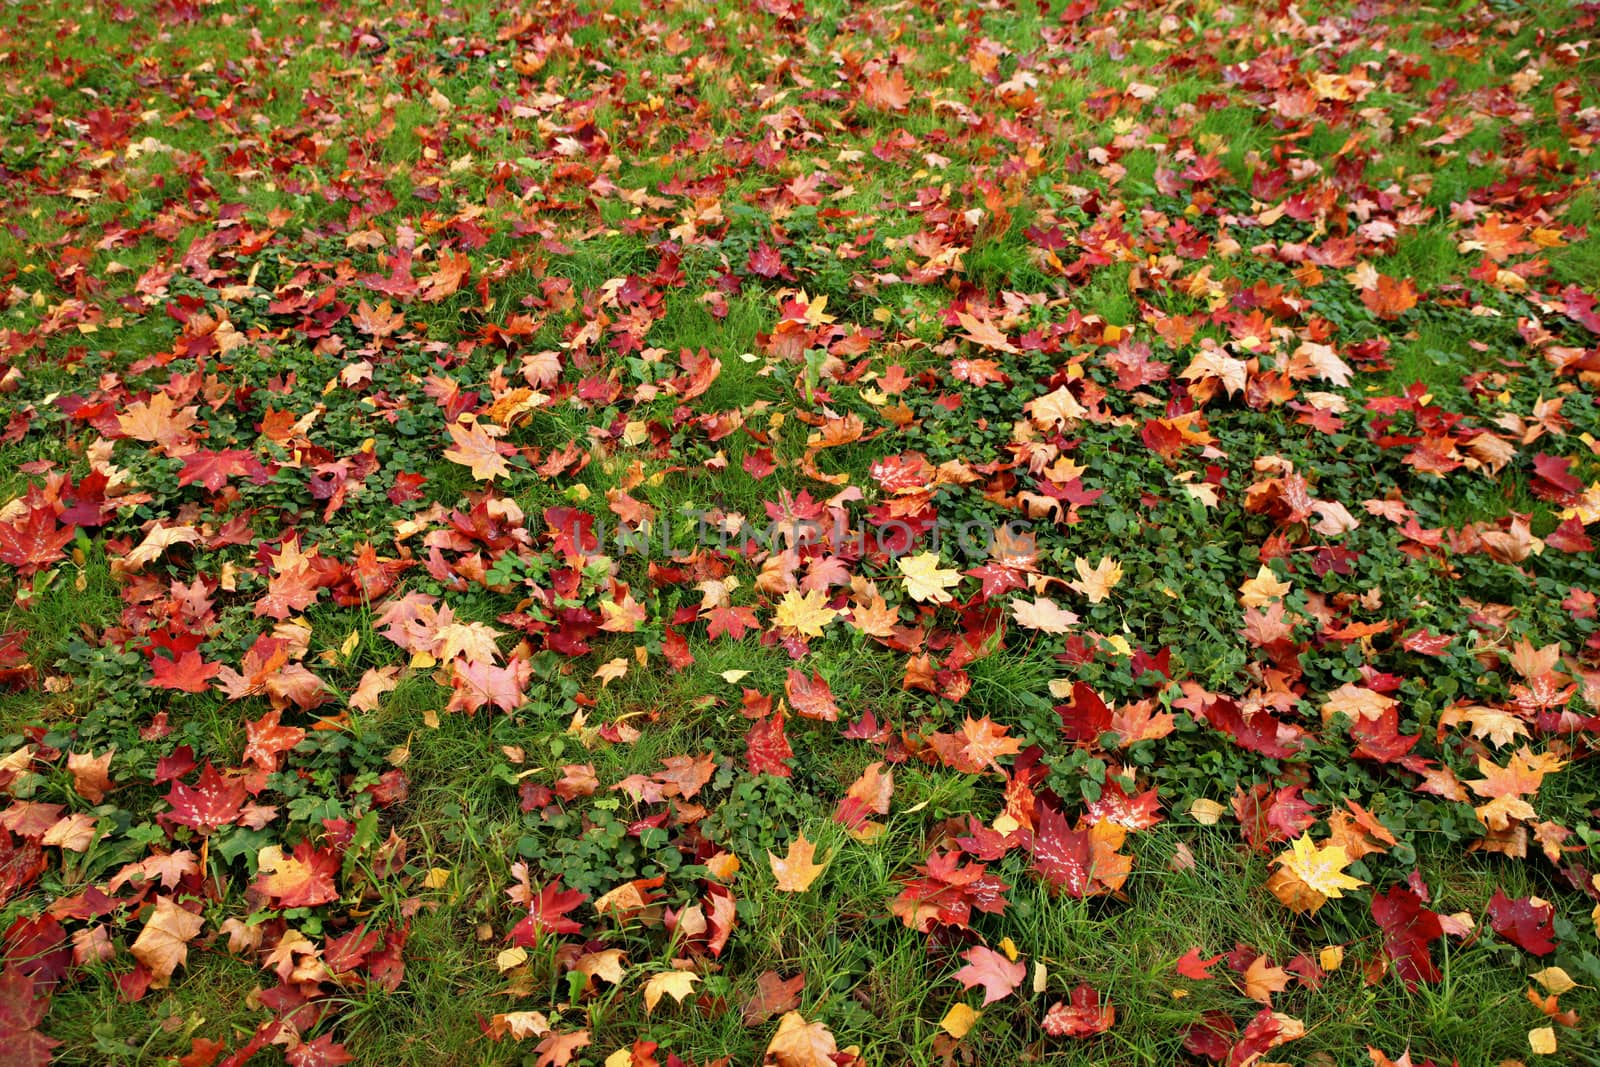 Fallen red maple leaves on green grass